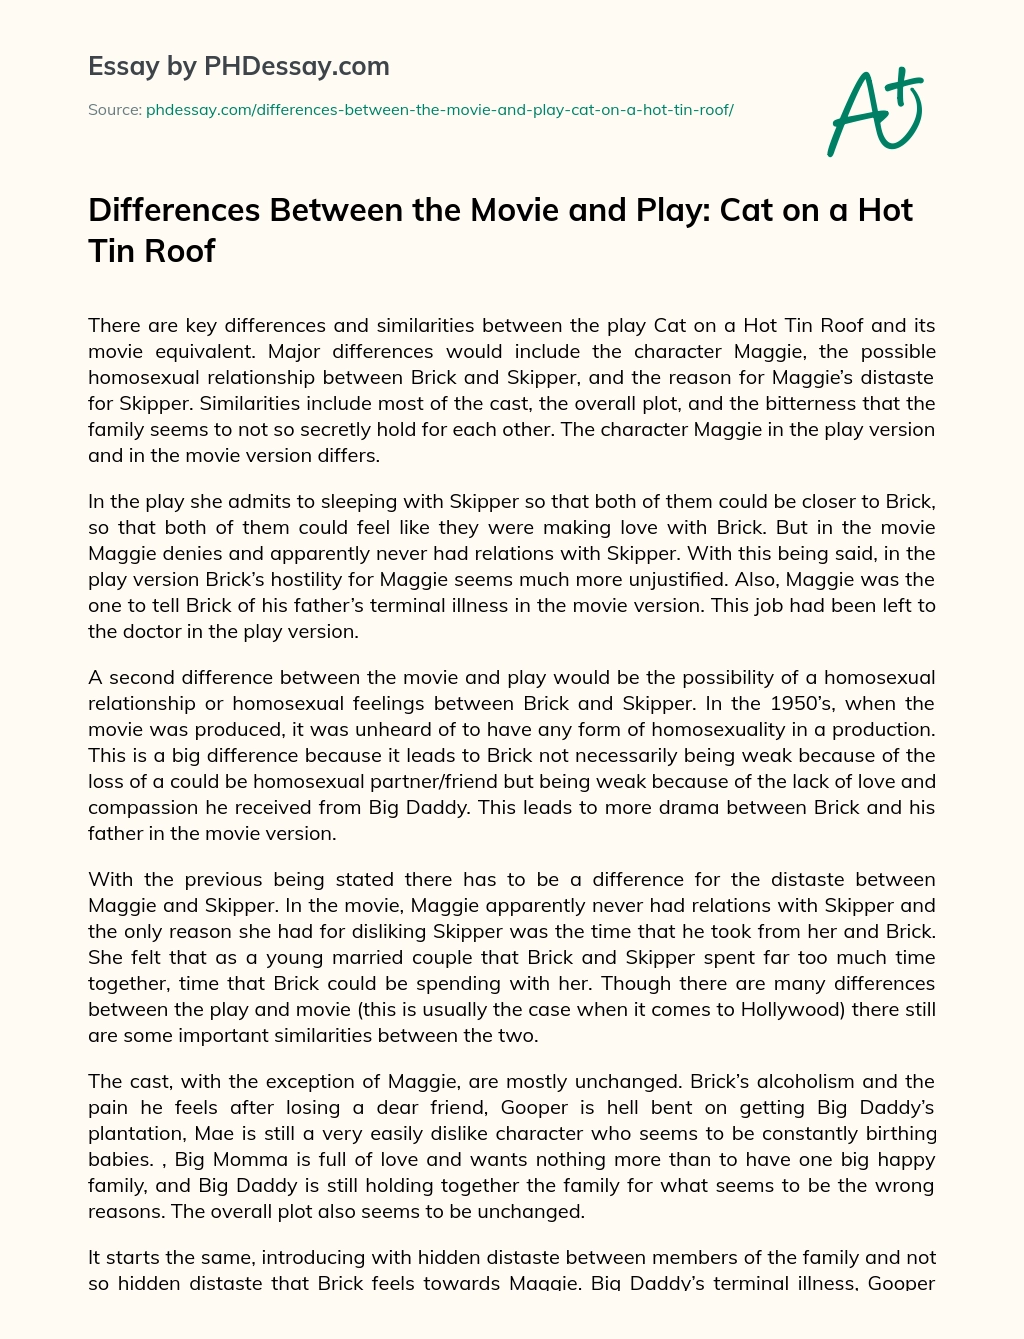 Differences Between the Movie and Play: Cat on a Hot Tin Roof essay